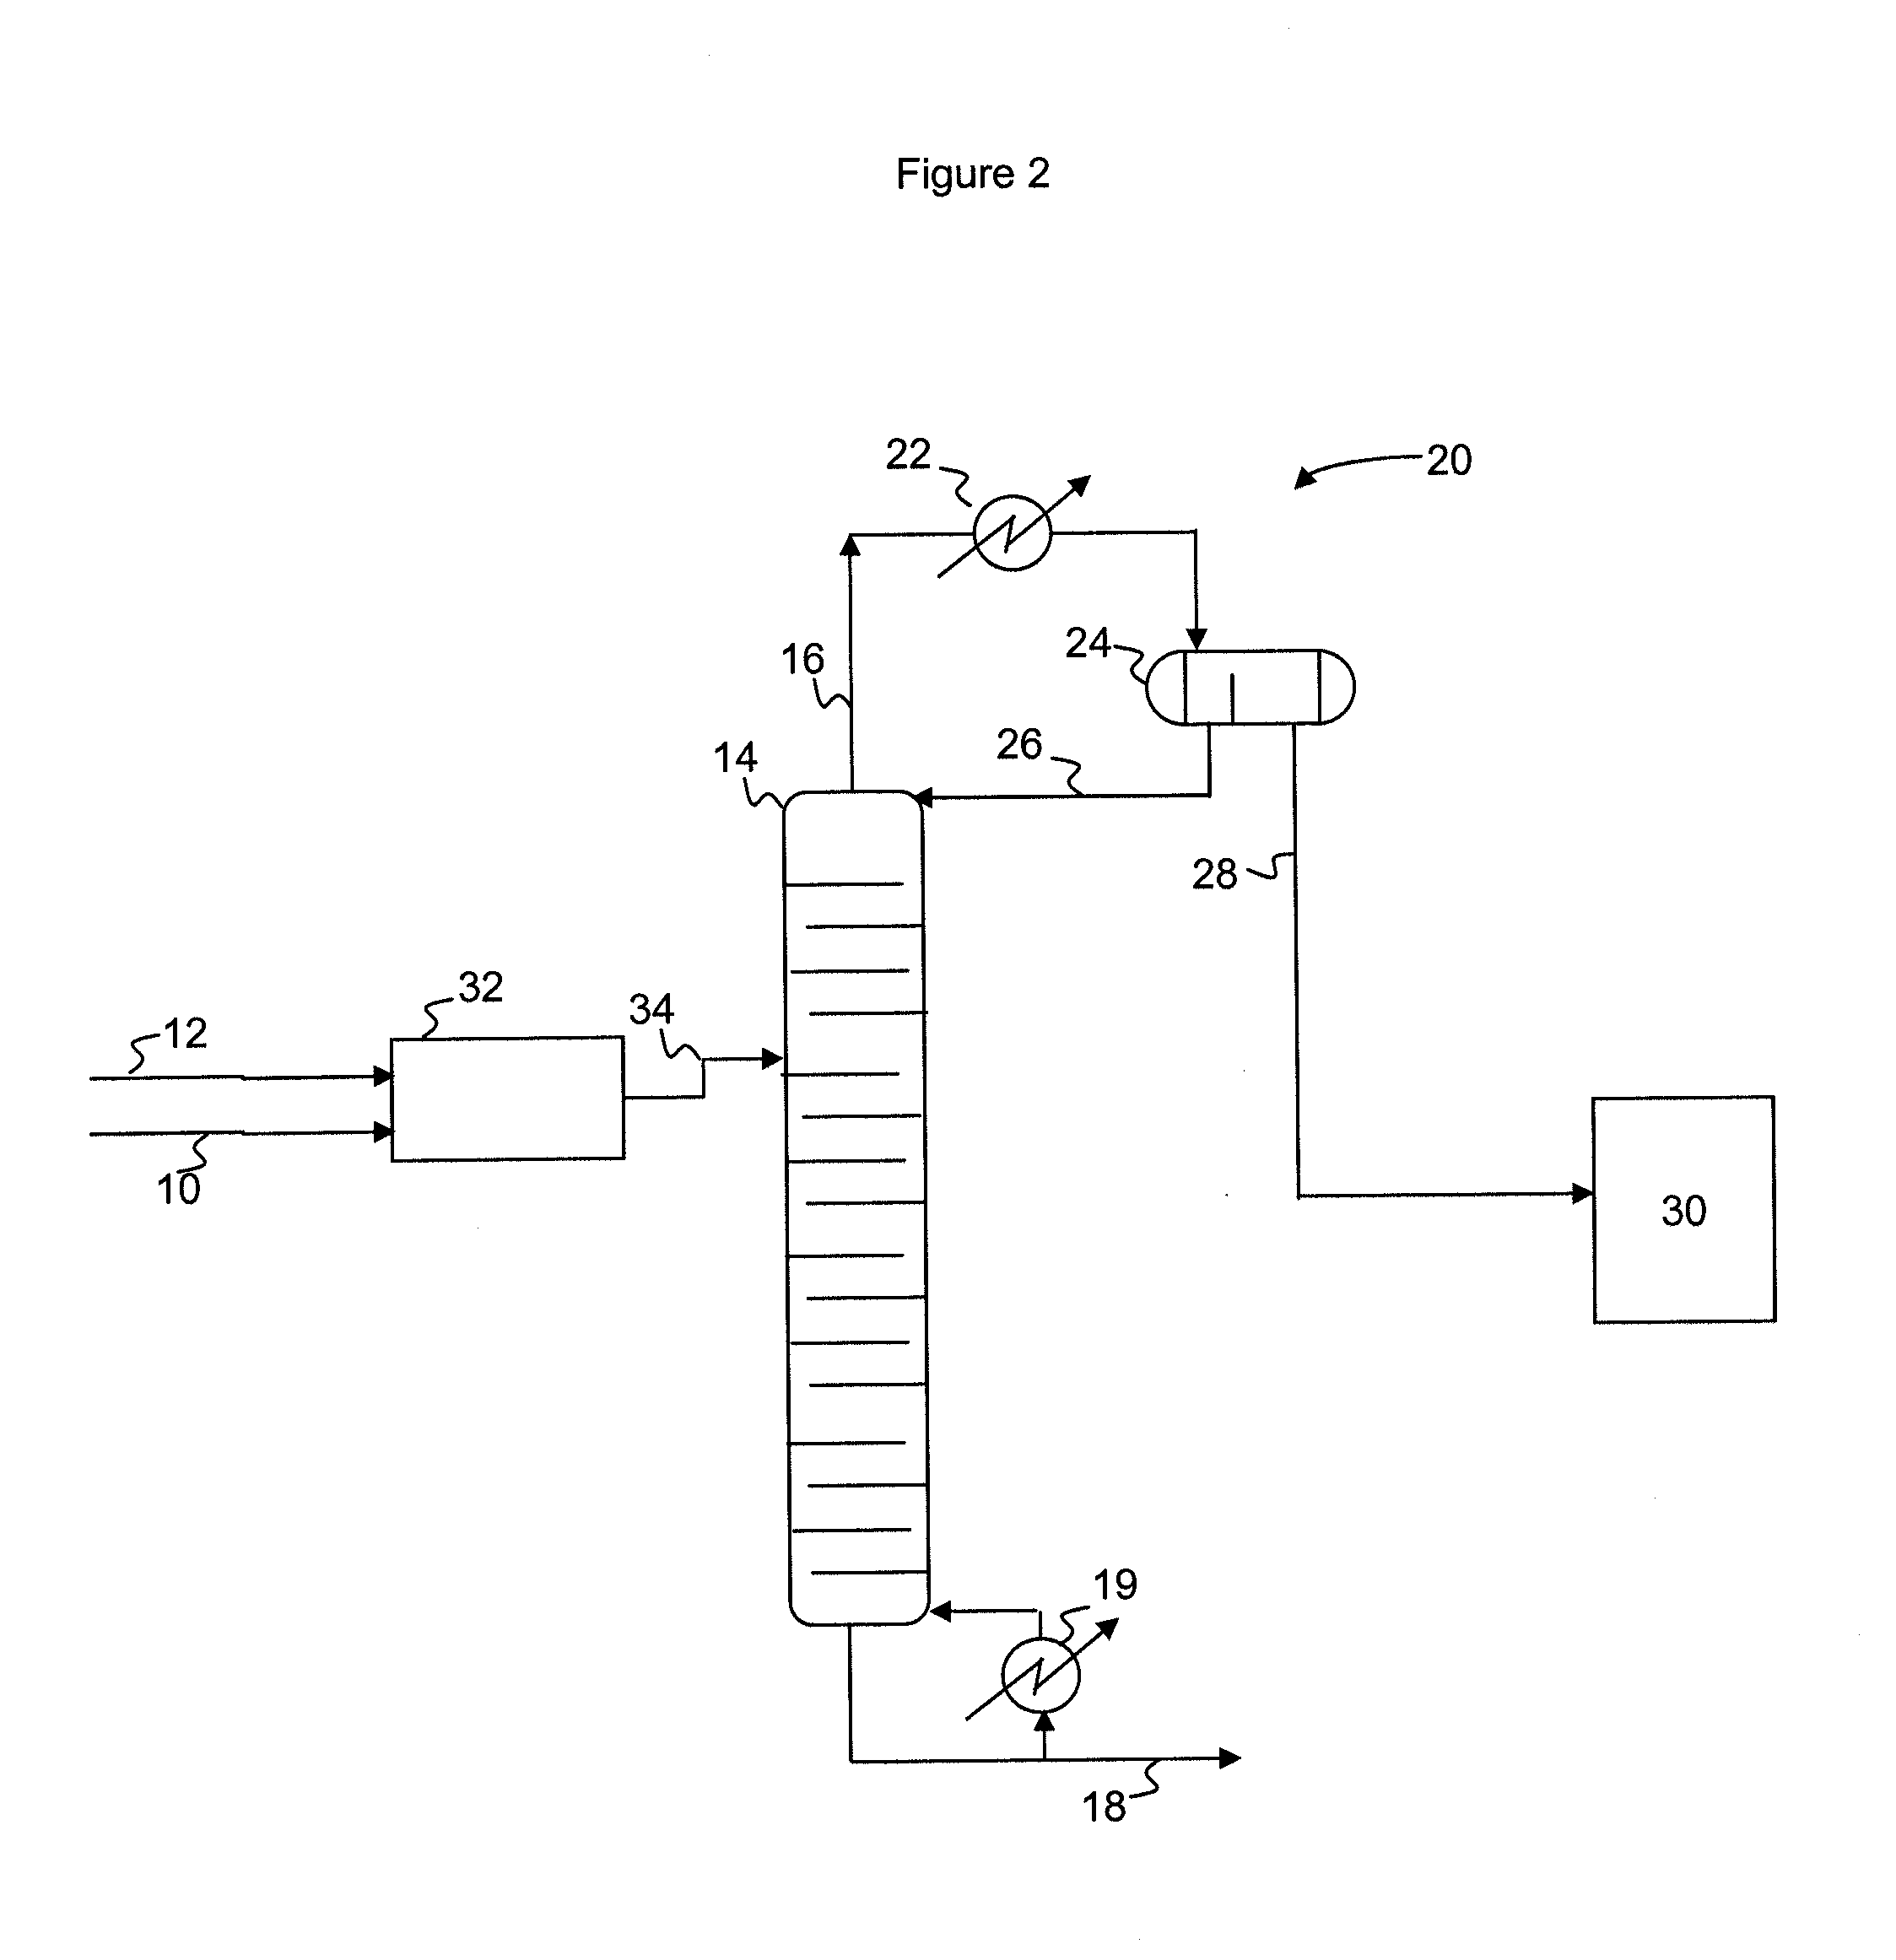 Process for producing epoxides